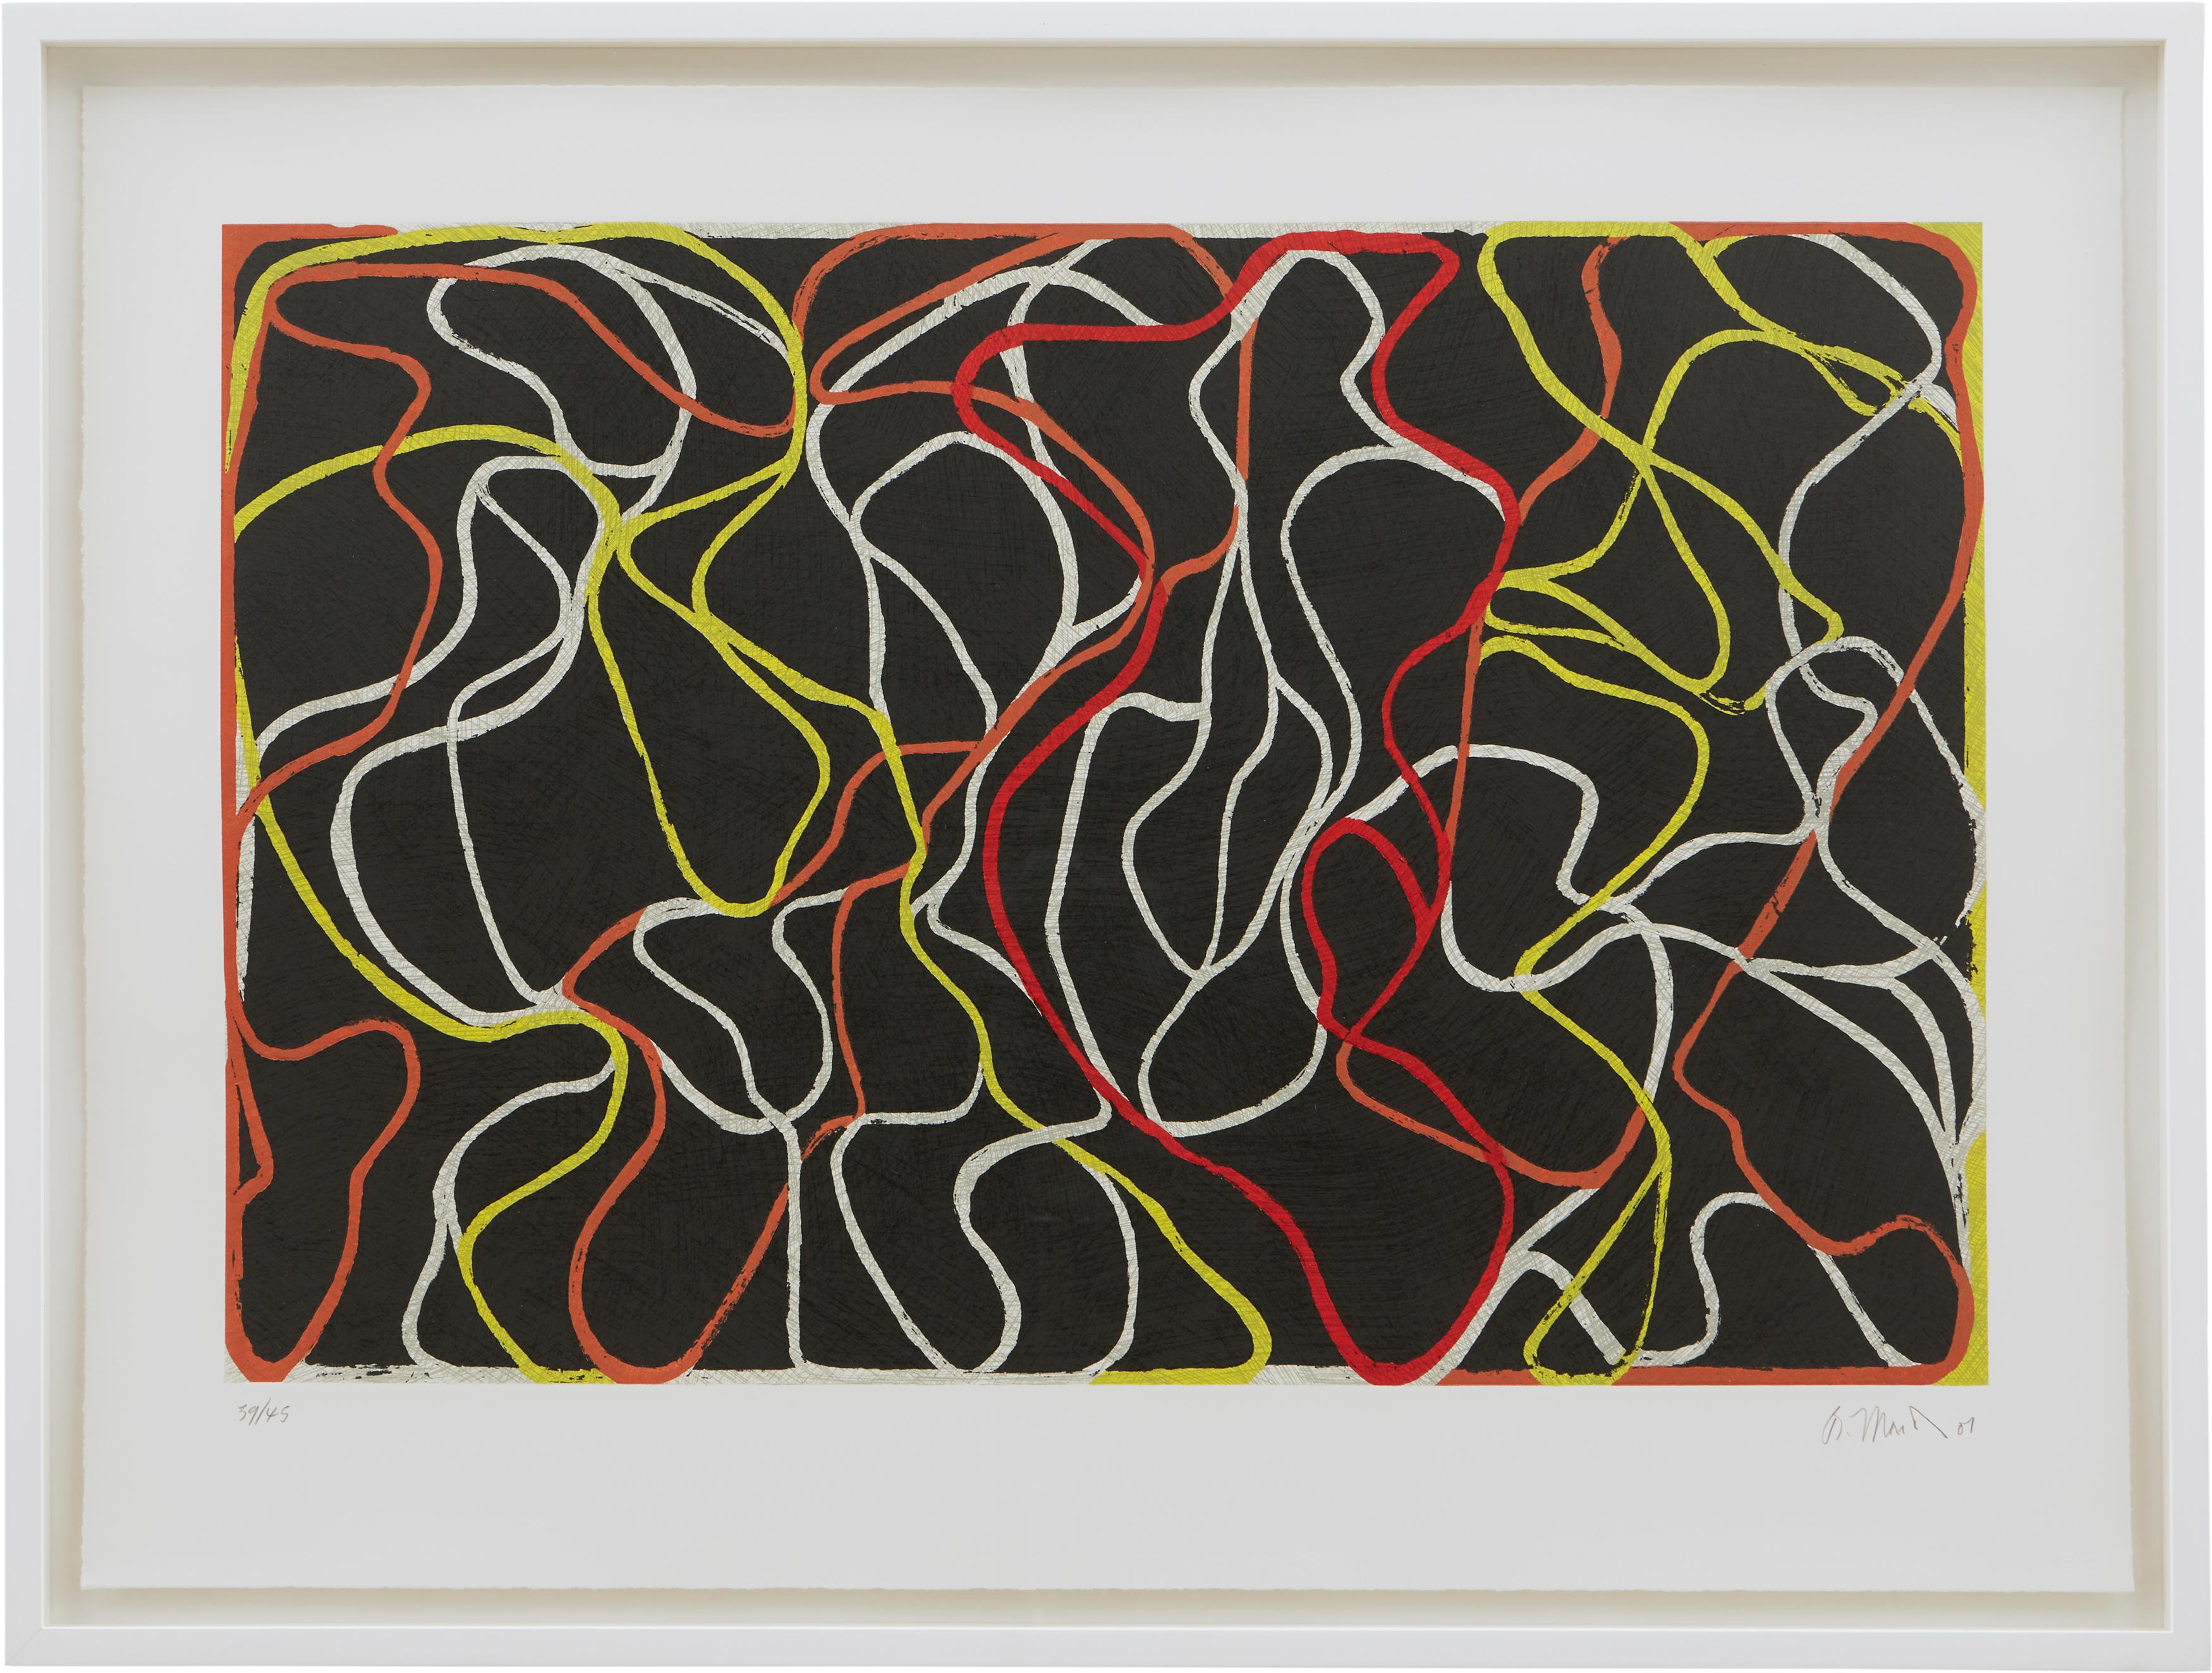 Beyond Eagles Mere 2 - Print by Brice Marden